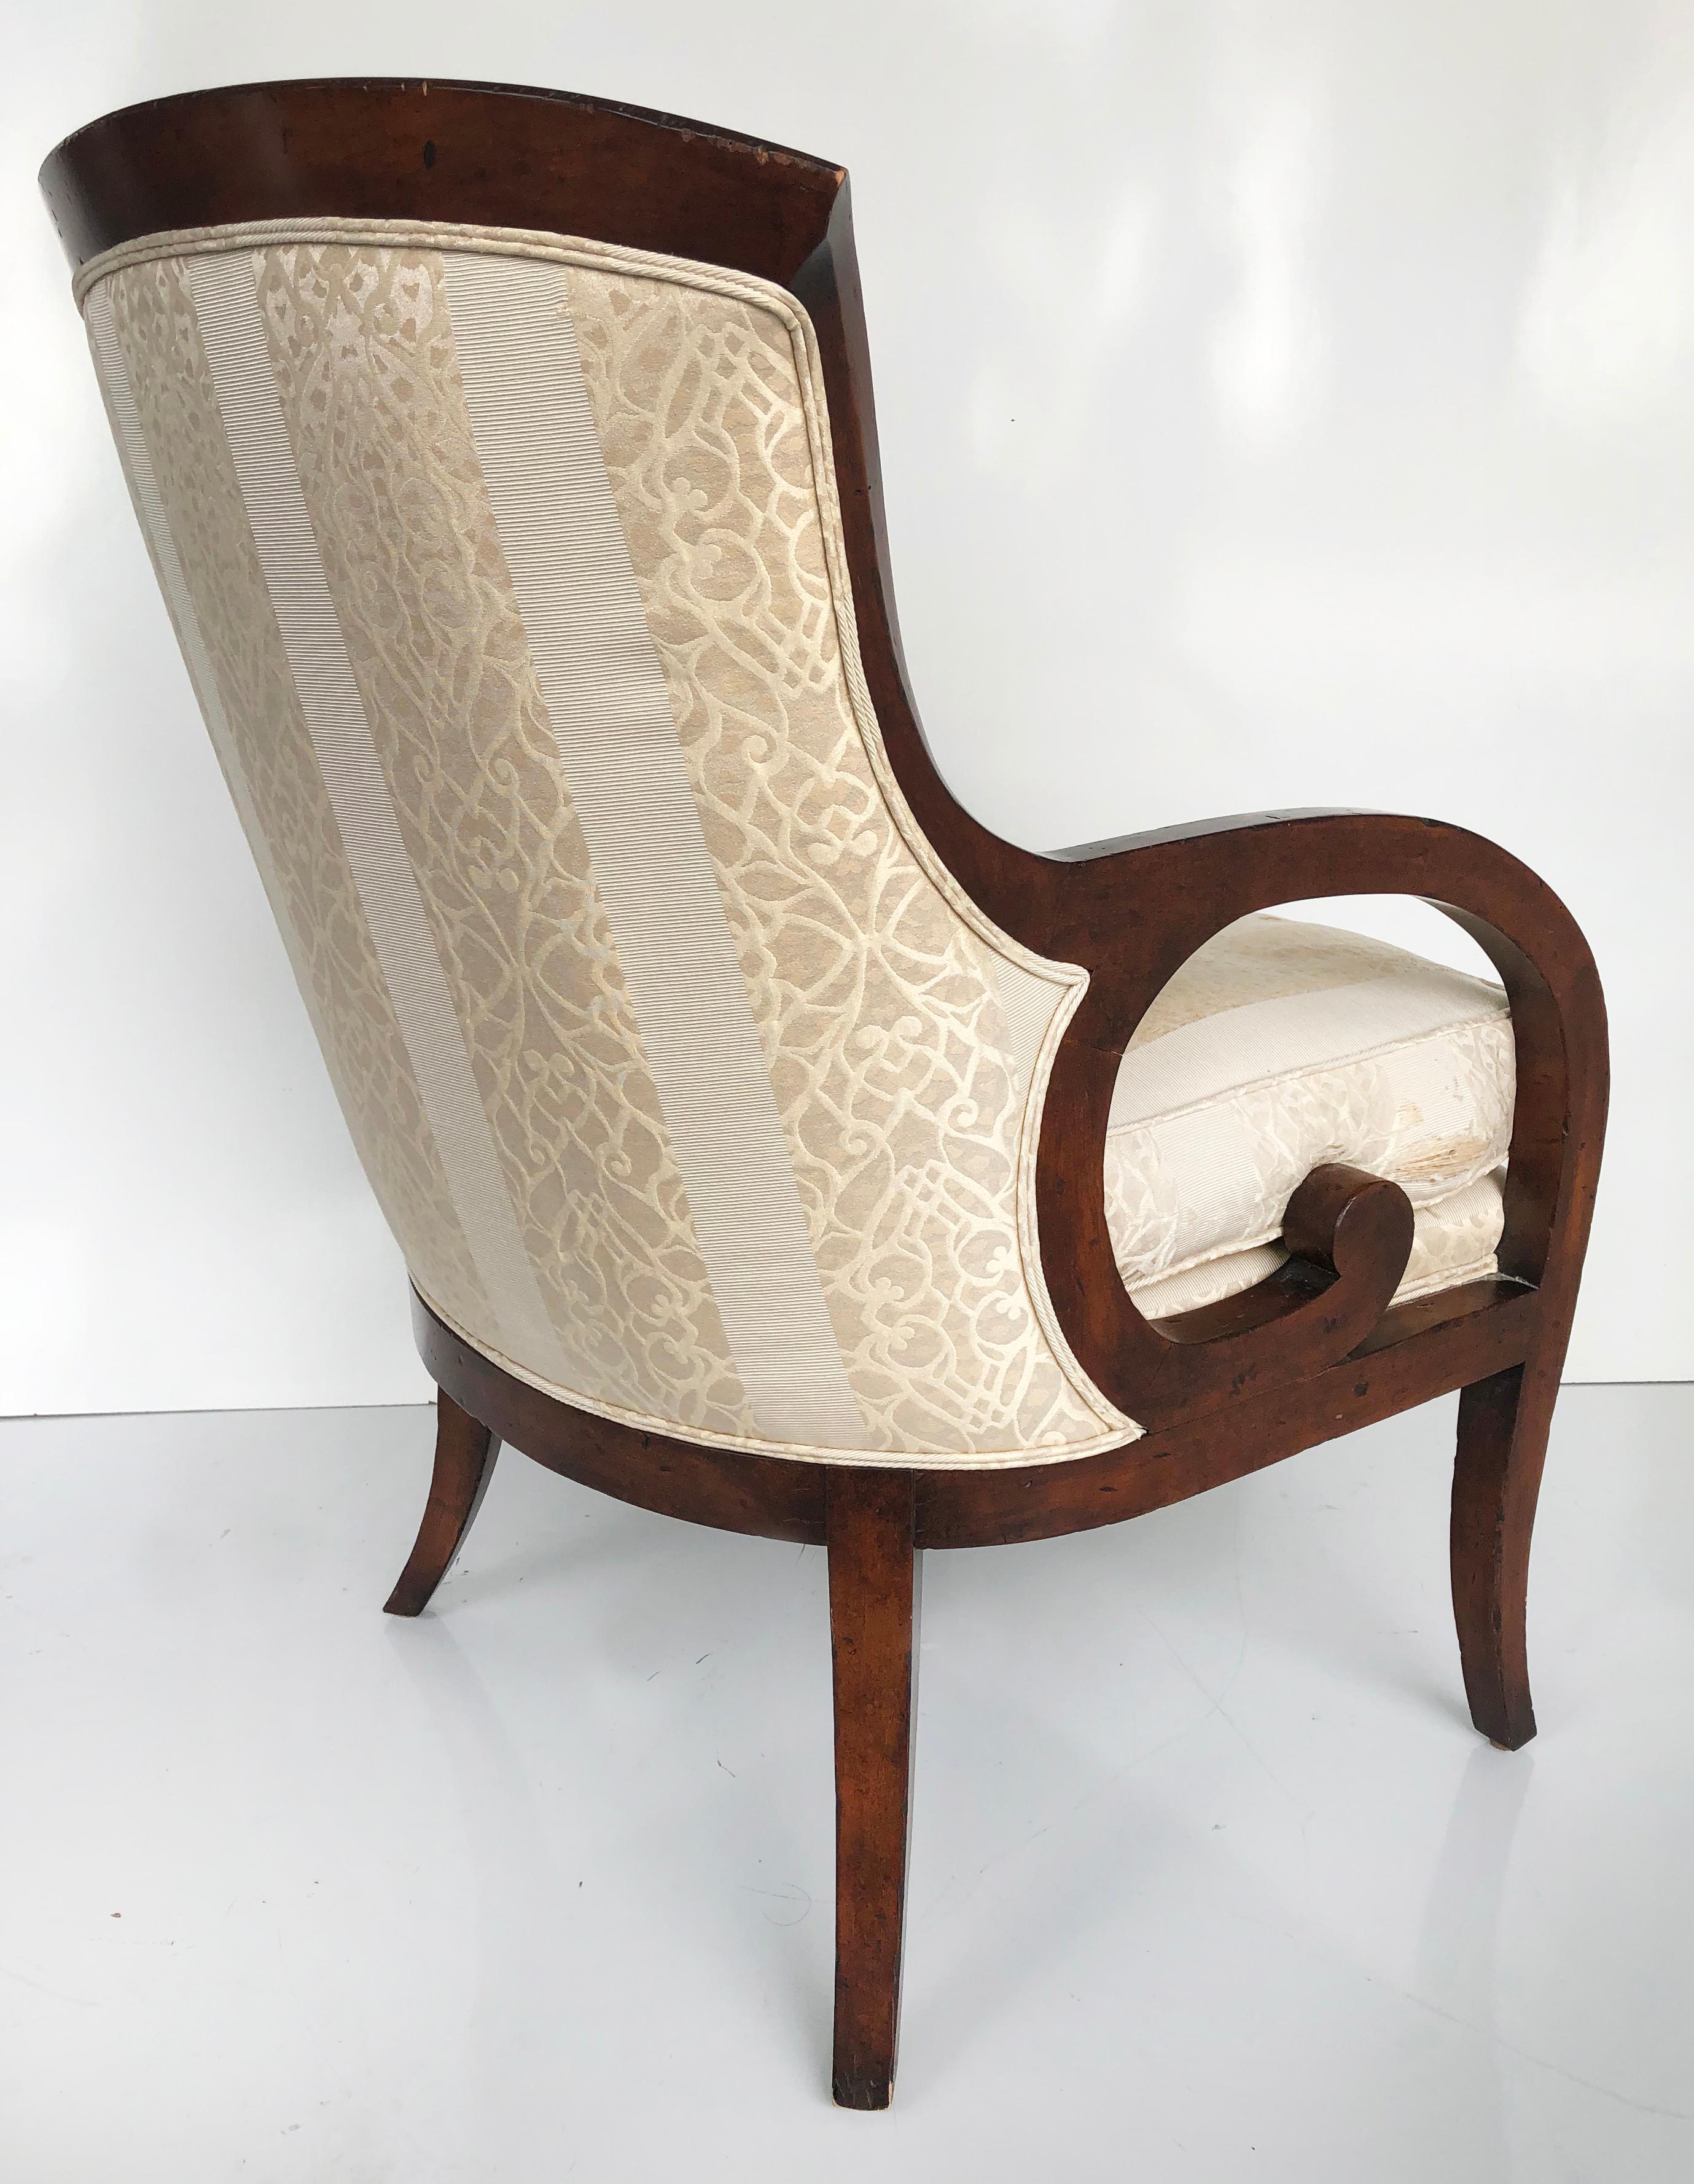 Lacquered Elegant Down Club Chairs, Hancock & Moore Attributed, Require Upholstering